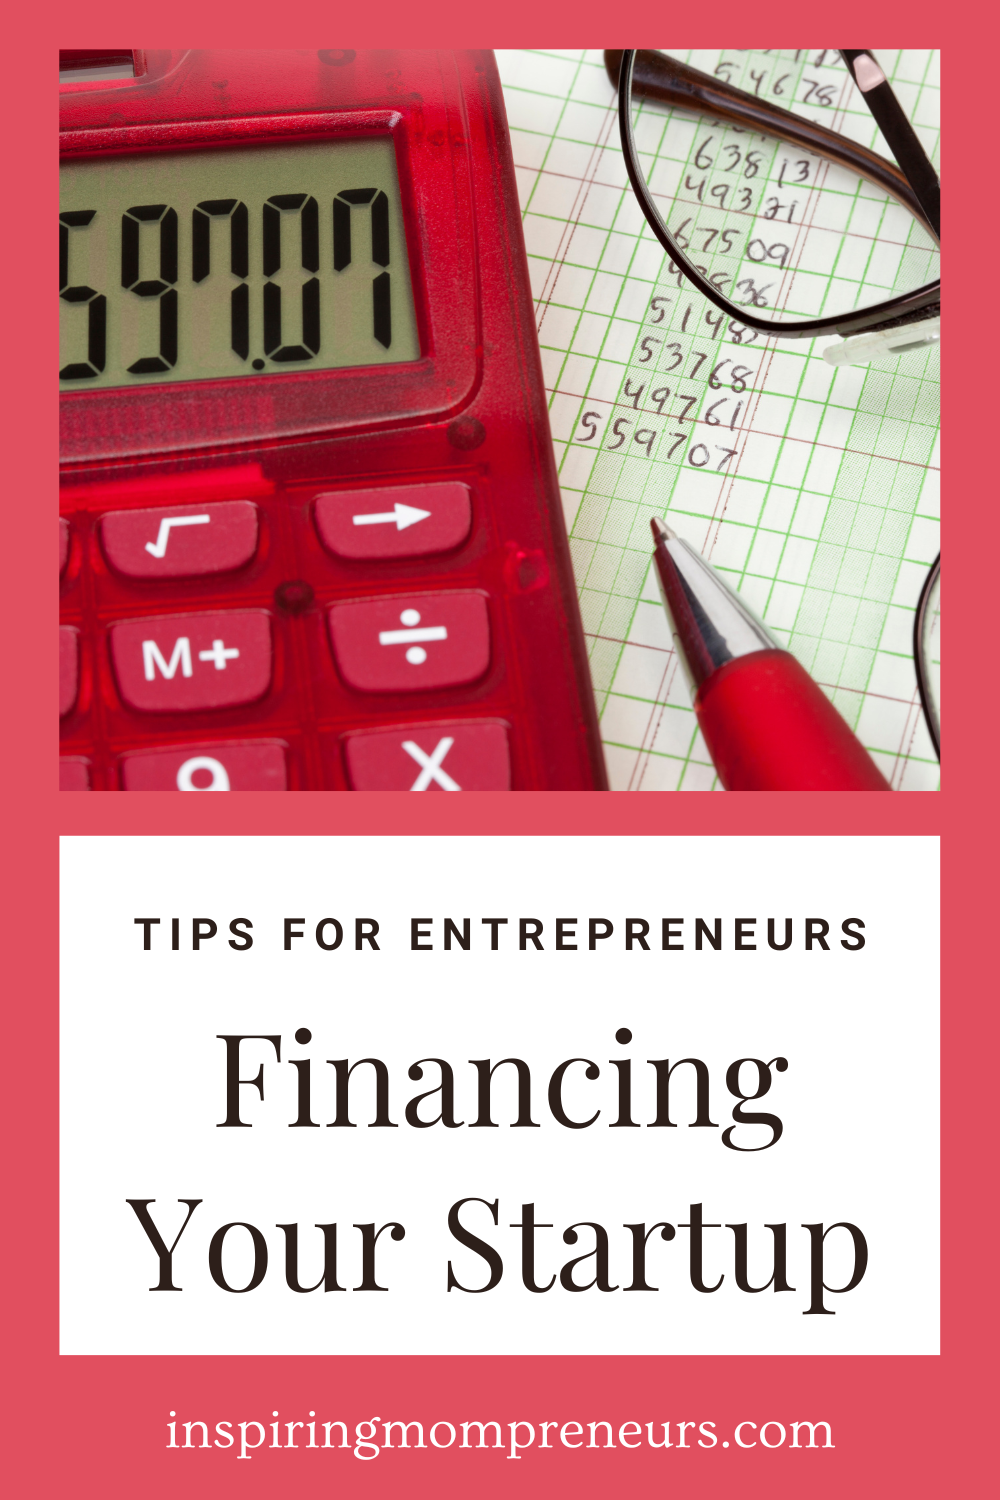 One of the most crucial and most daunting aspects of the entrepreneurial journey is securing financing for your startup. Here are our top financing tips.